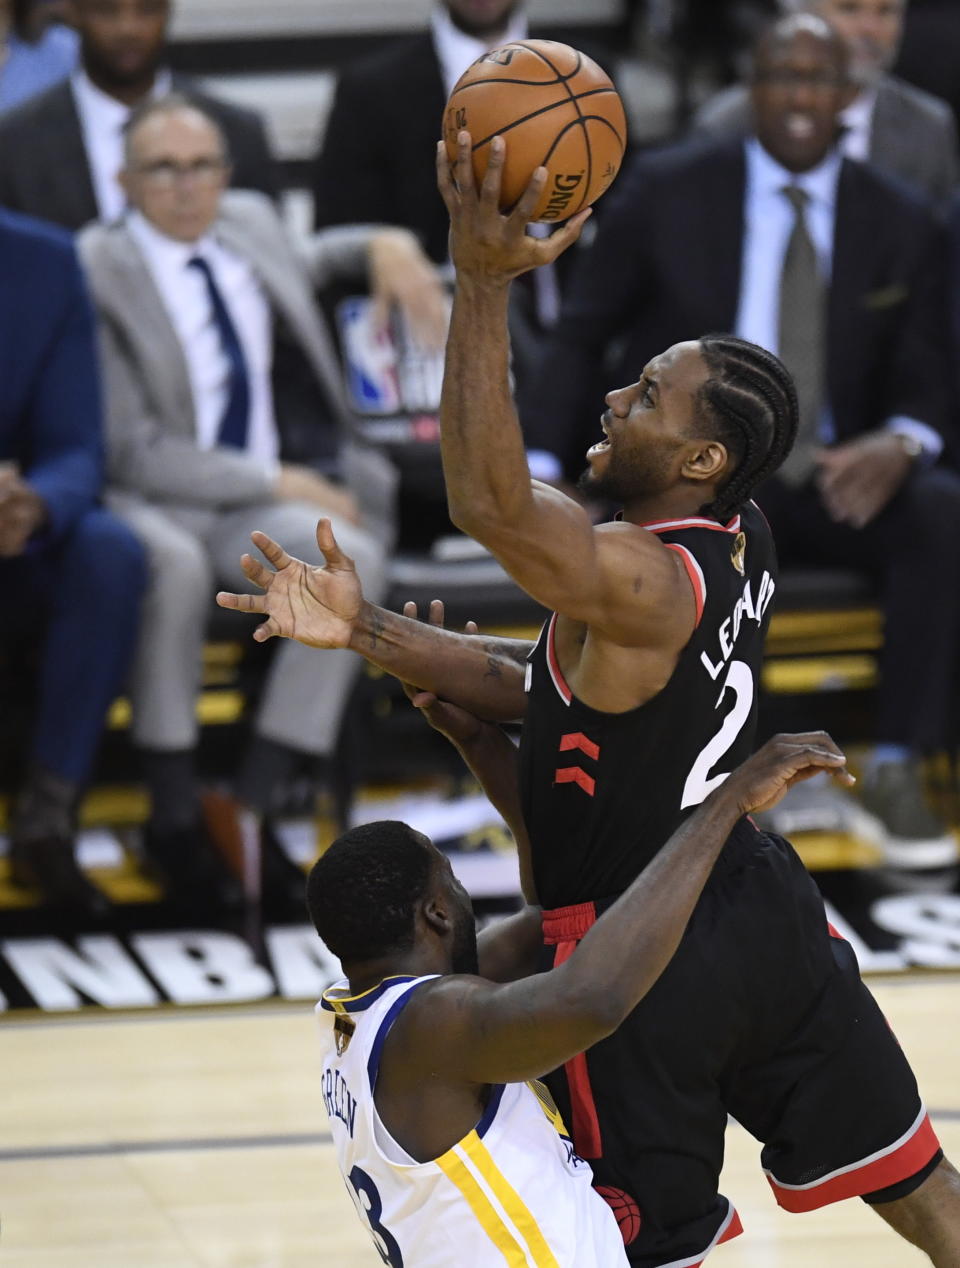 Toronto Raptors forward Kawhi Leonard (2) drives for the basket as Golden State Warriors forward Draymond Green (23) defends during the first half of Game 3 of basketball’s NBA Finals, Wednesday, June 5, 2019, in Oakland, Calif. (Frank Gunn/The Canadian Press via AP)